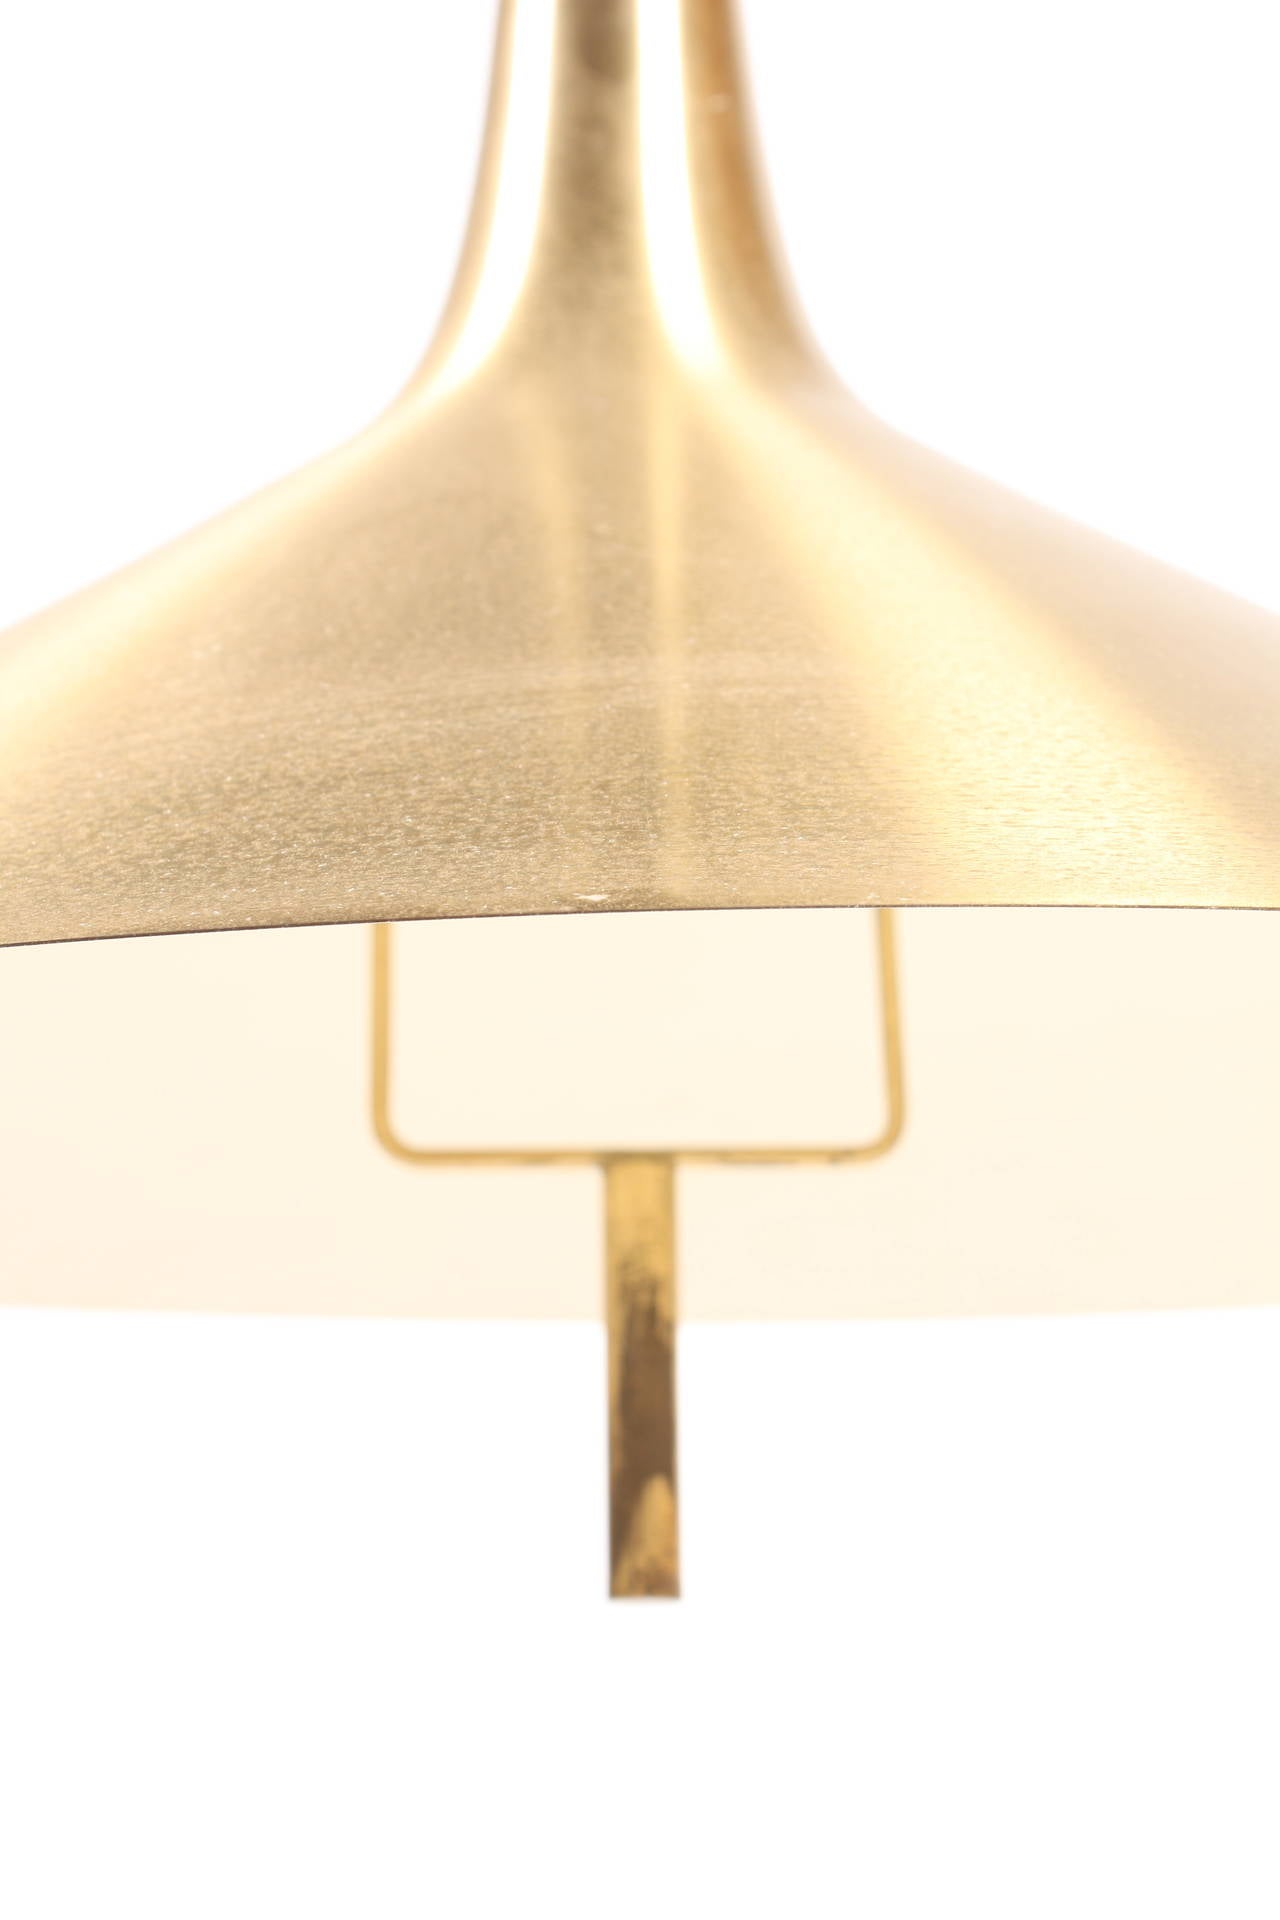 Mid-20th Century Danish Ceiling Lamp in Brass  For Sale